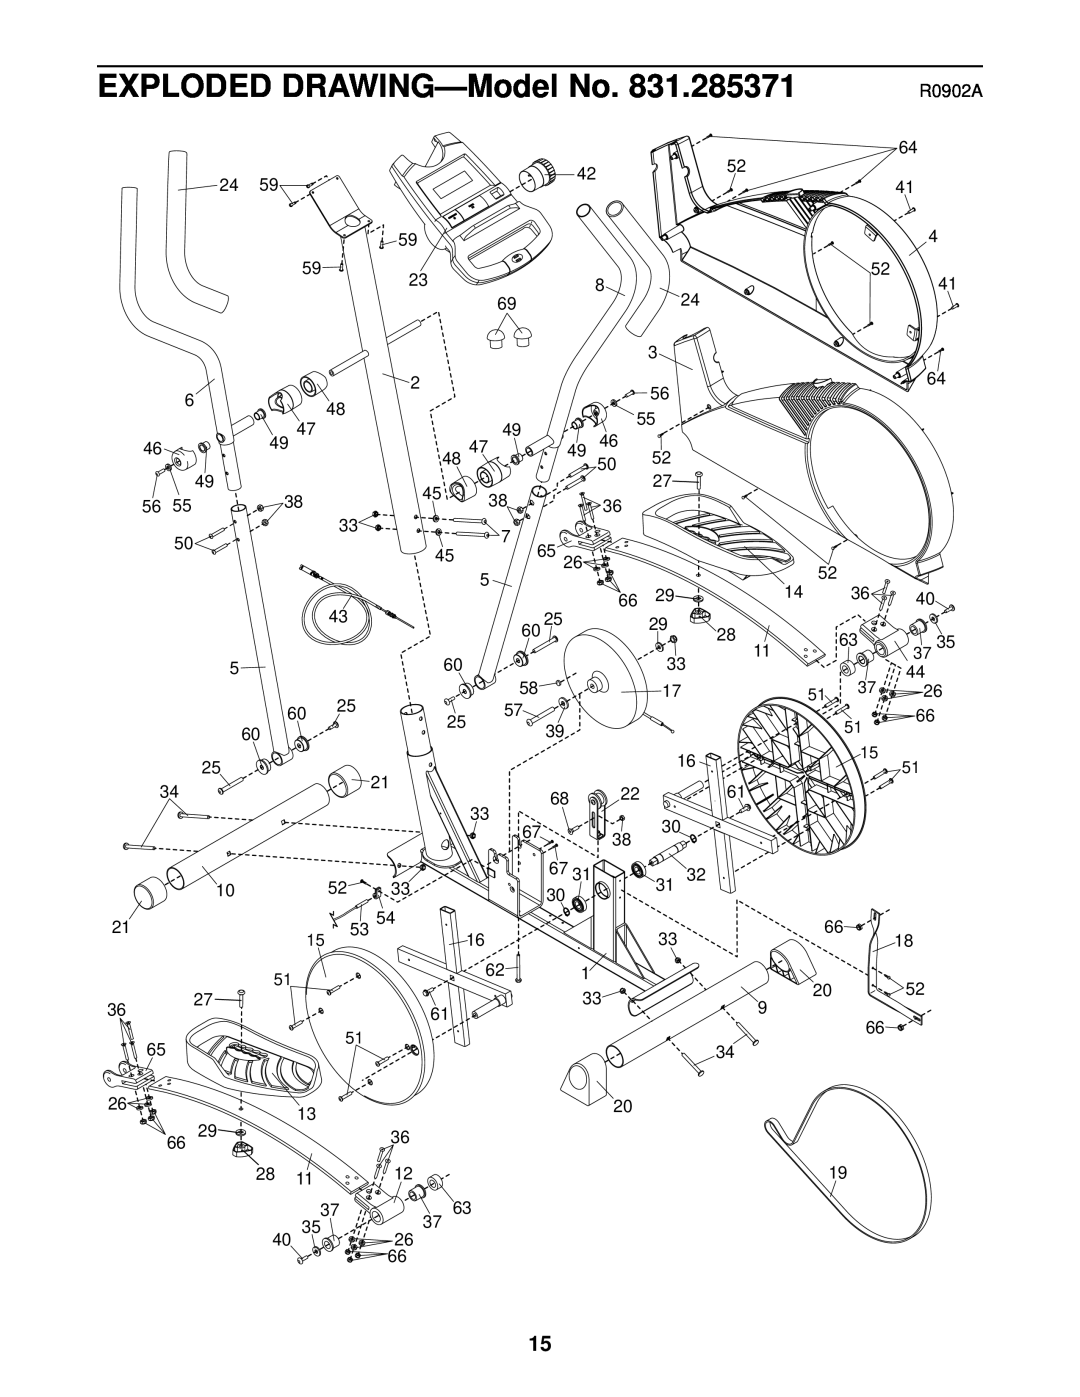 ProForm 831.285371 user manual EXPLODED DRAWING-Model No, 3735, R0902A 